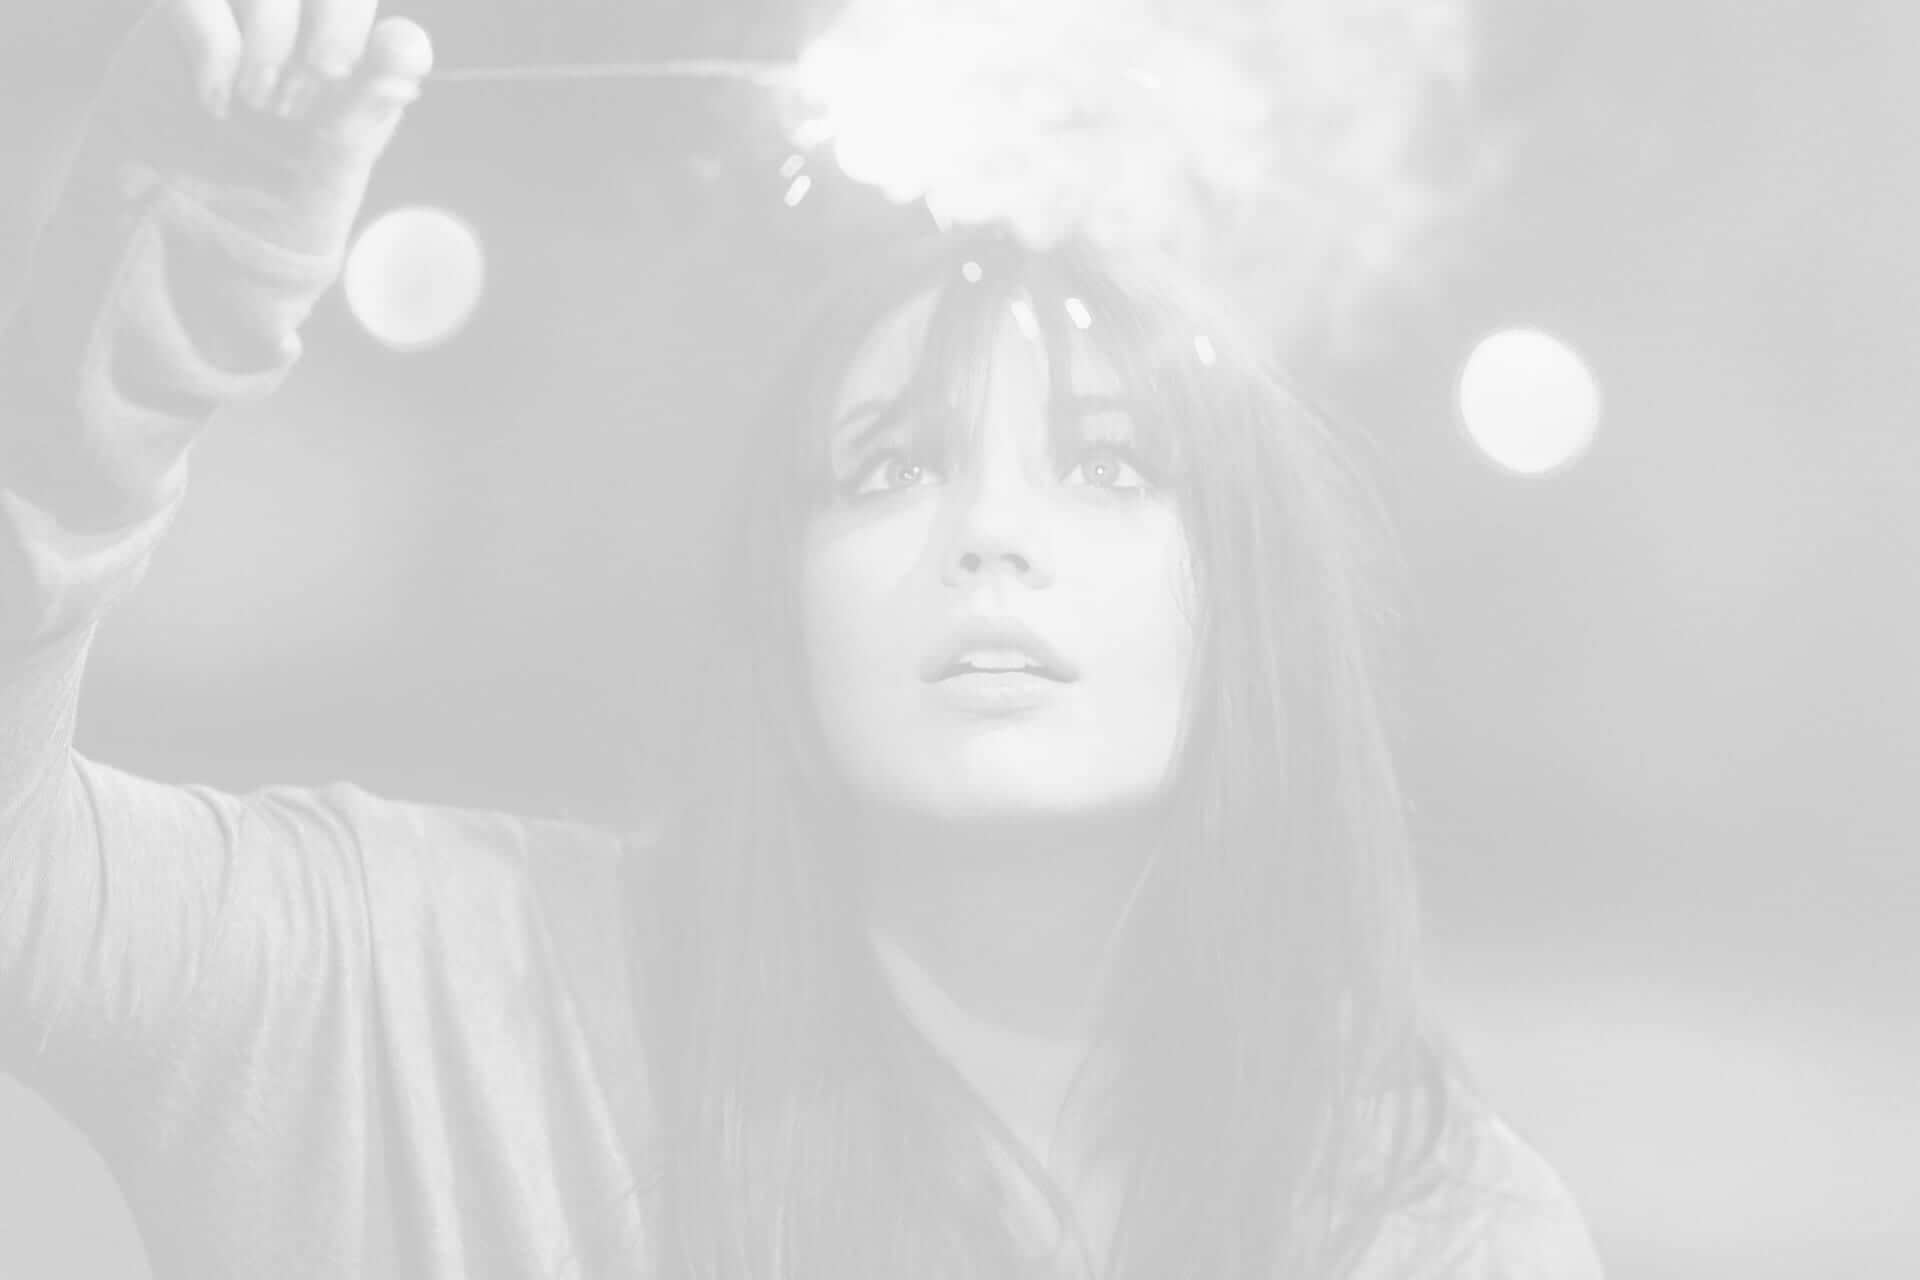 A woman holding a lit sparkler, looking upwards with a focused expression, surrounded by soft bokeh lights in a monochrome setting.